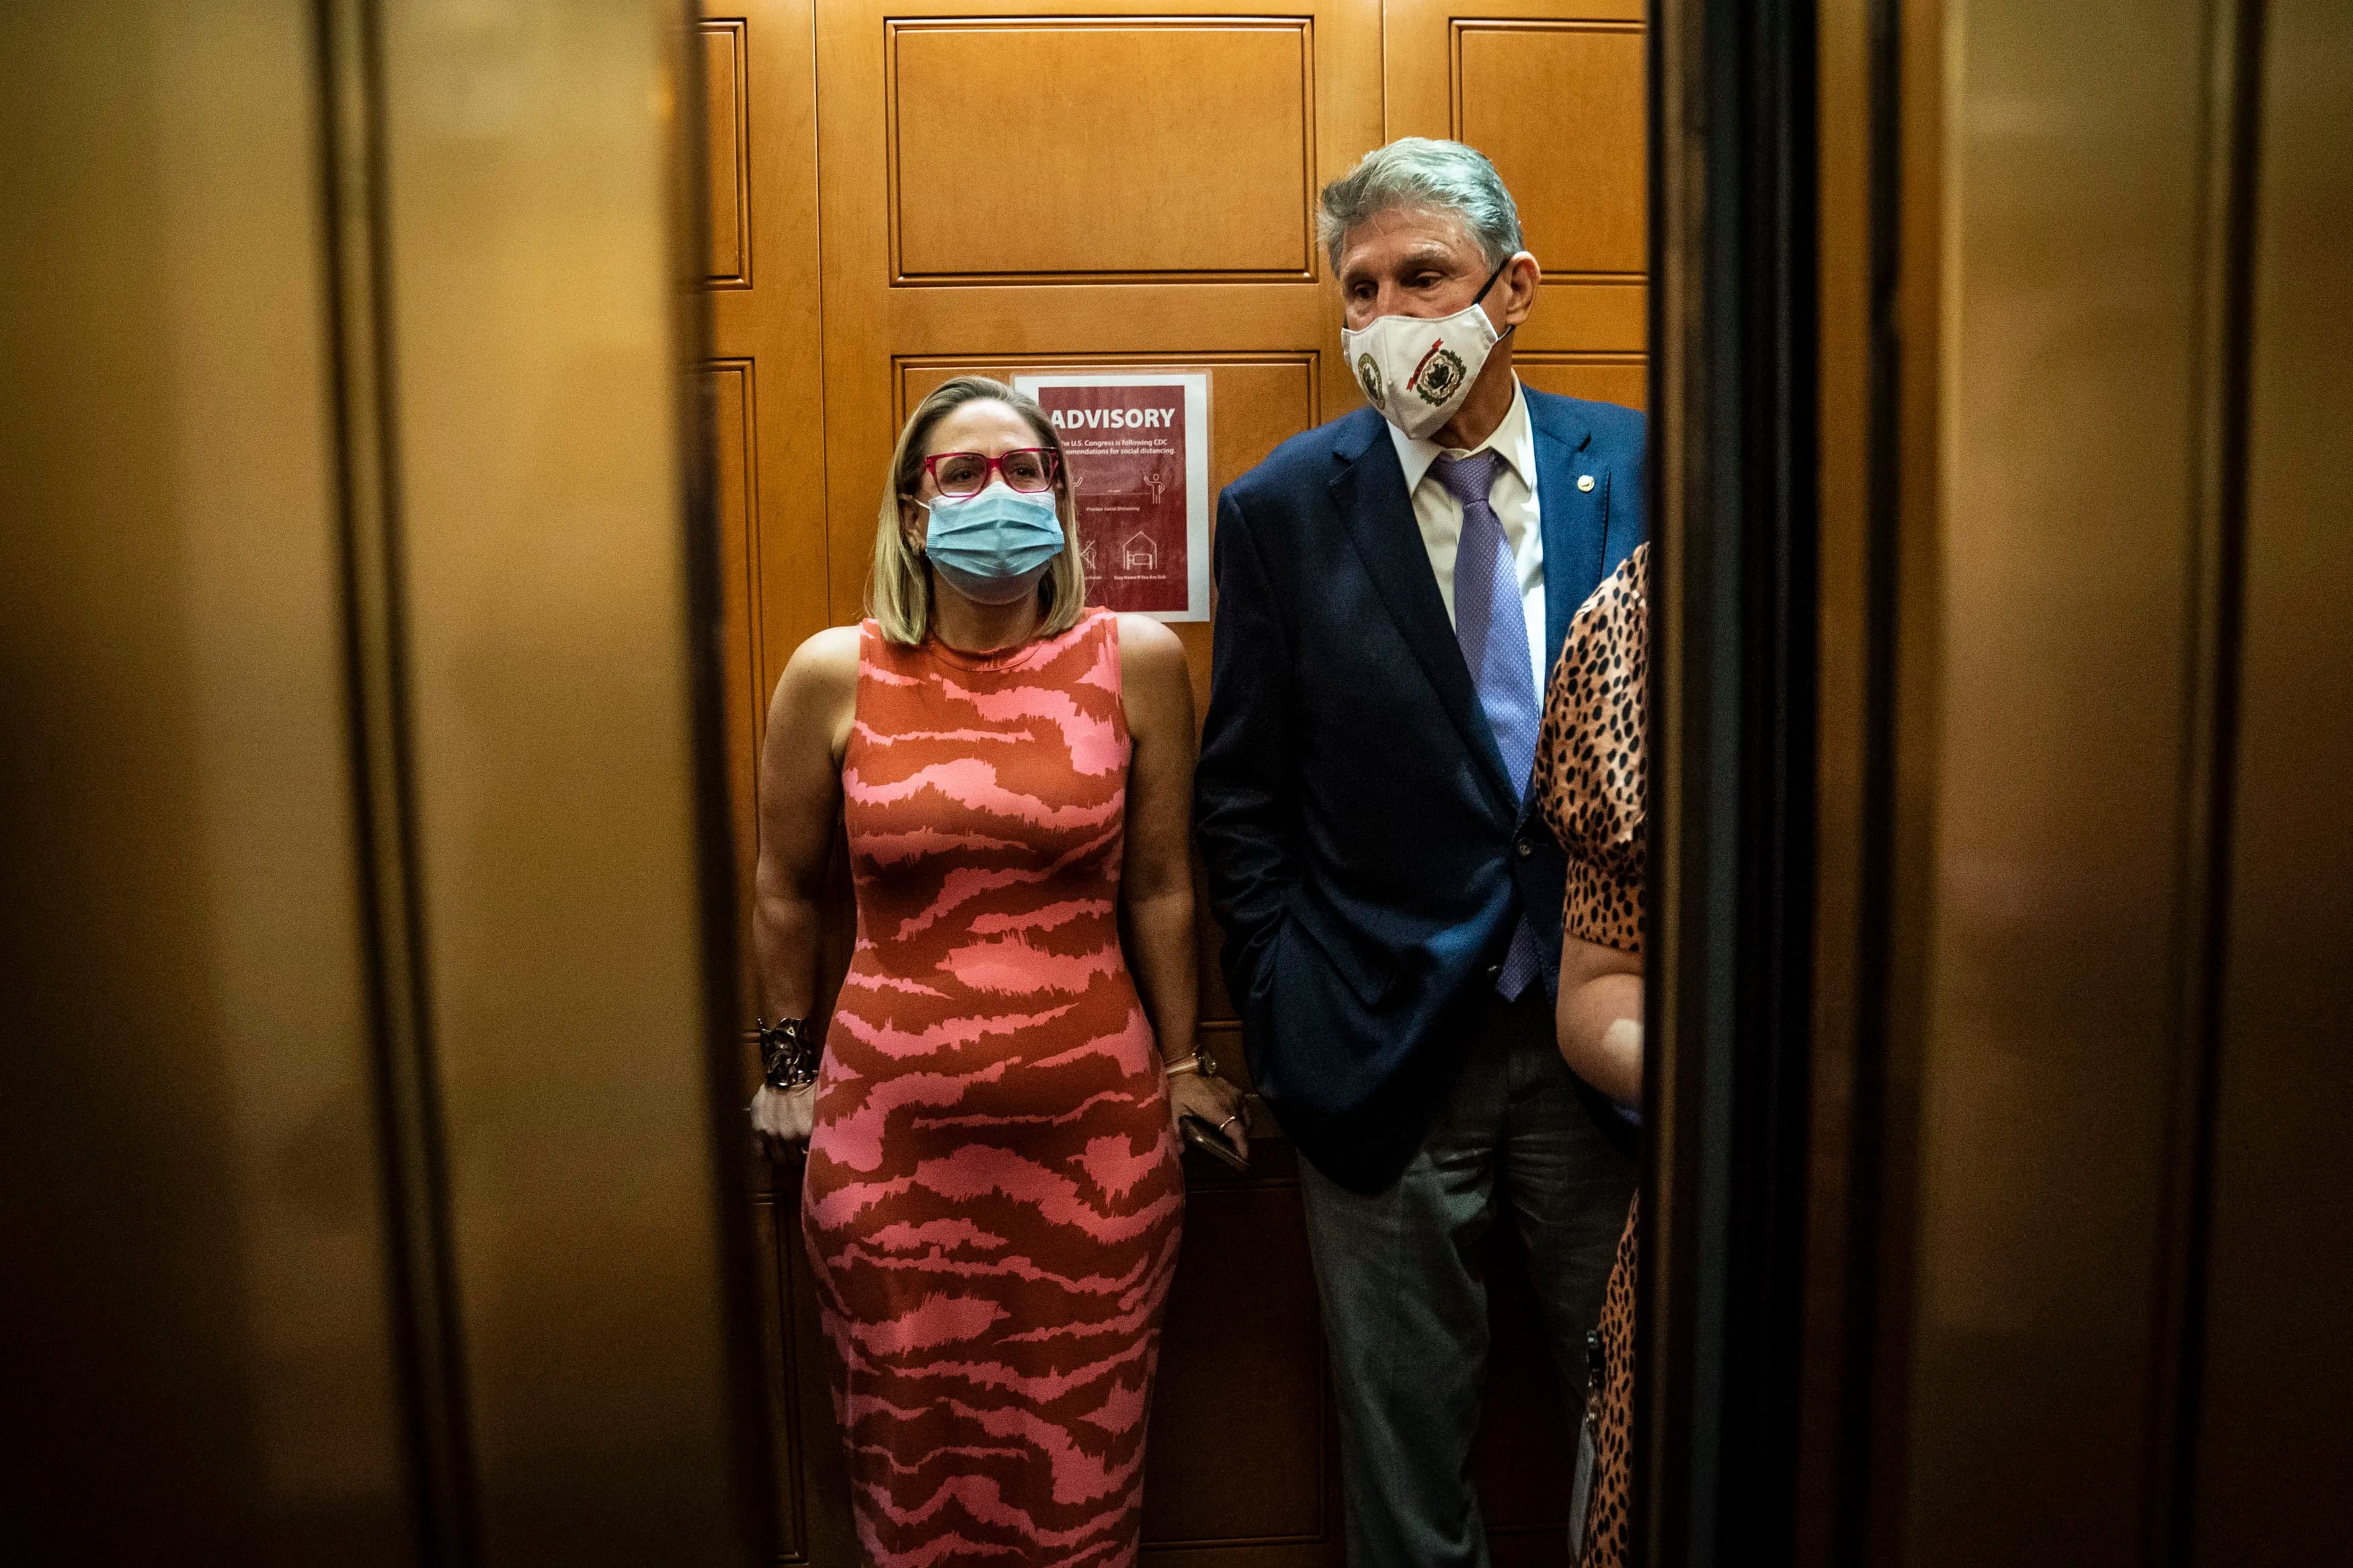 Democratic Sens. Kyrsten Sinema of Arizona and Joe Manchin of West Virginia board an elevator after a private meeting between the two of them on Sept. 30 on Capitol Hill.